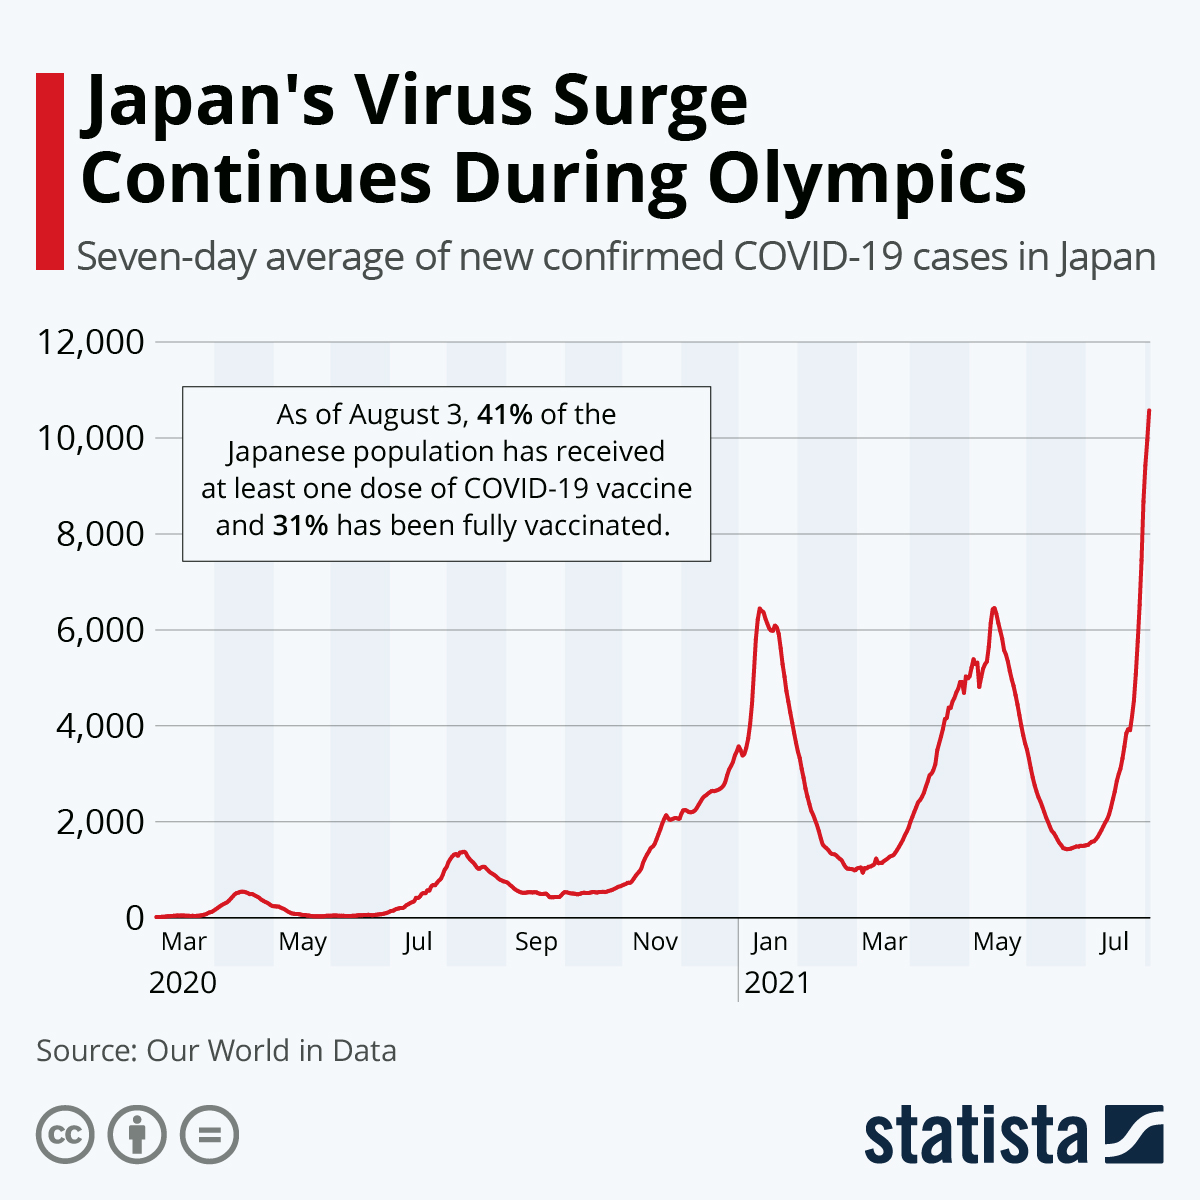 Japan's Virus Surge Continues During Olympics